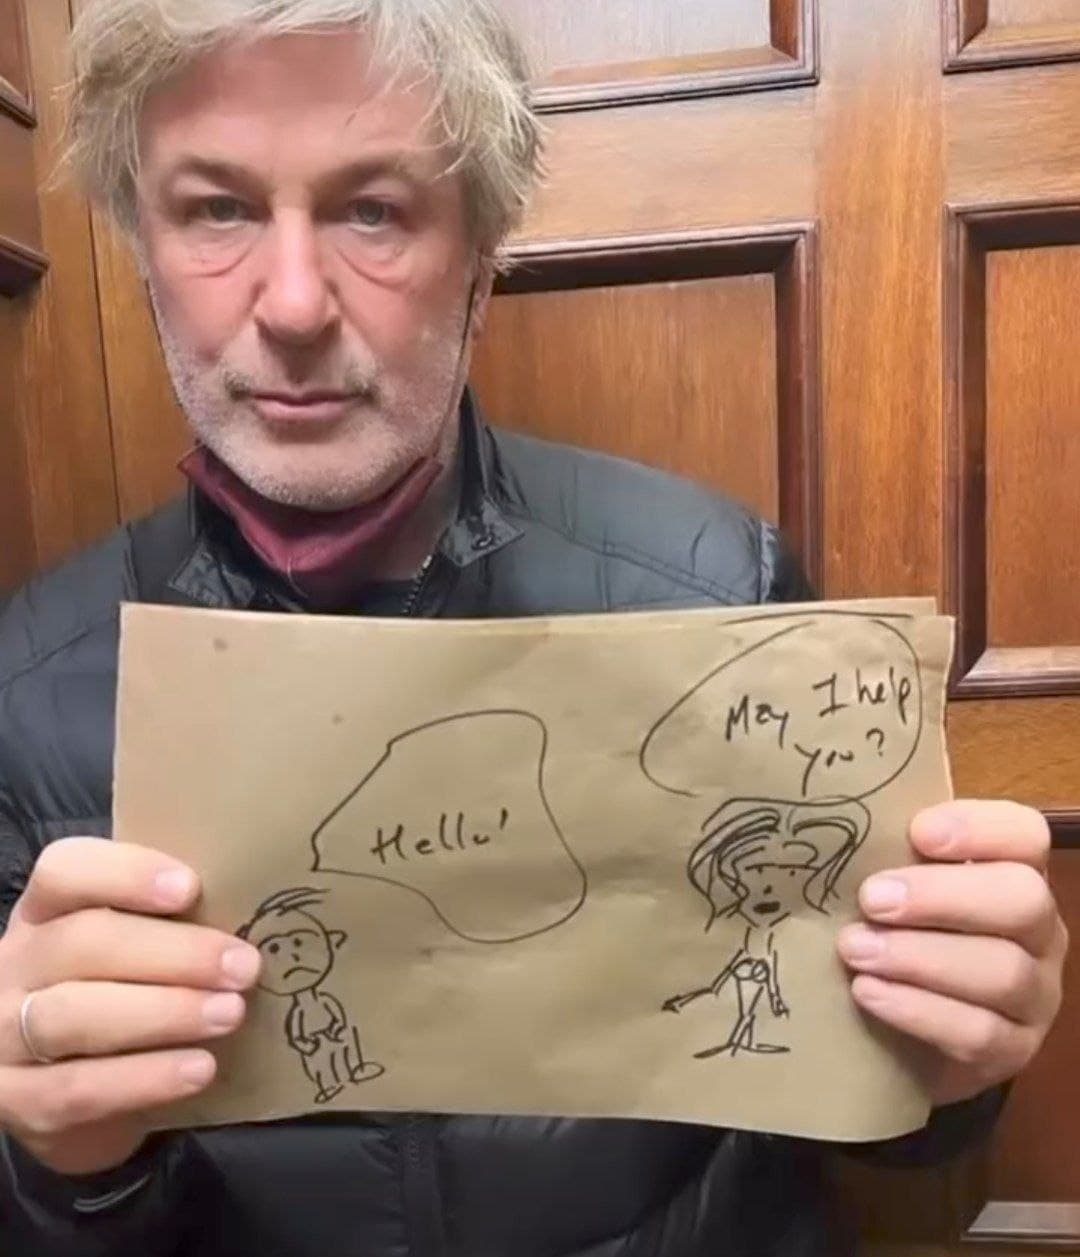 Mysterious messages from Alec Baldwin’s wife, quickly deleted from Instagram